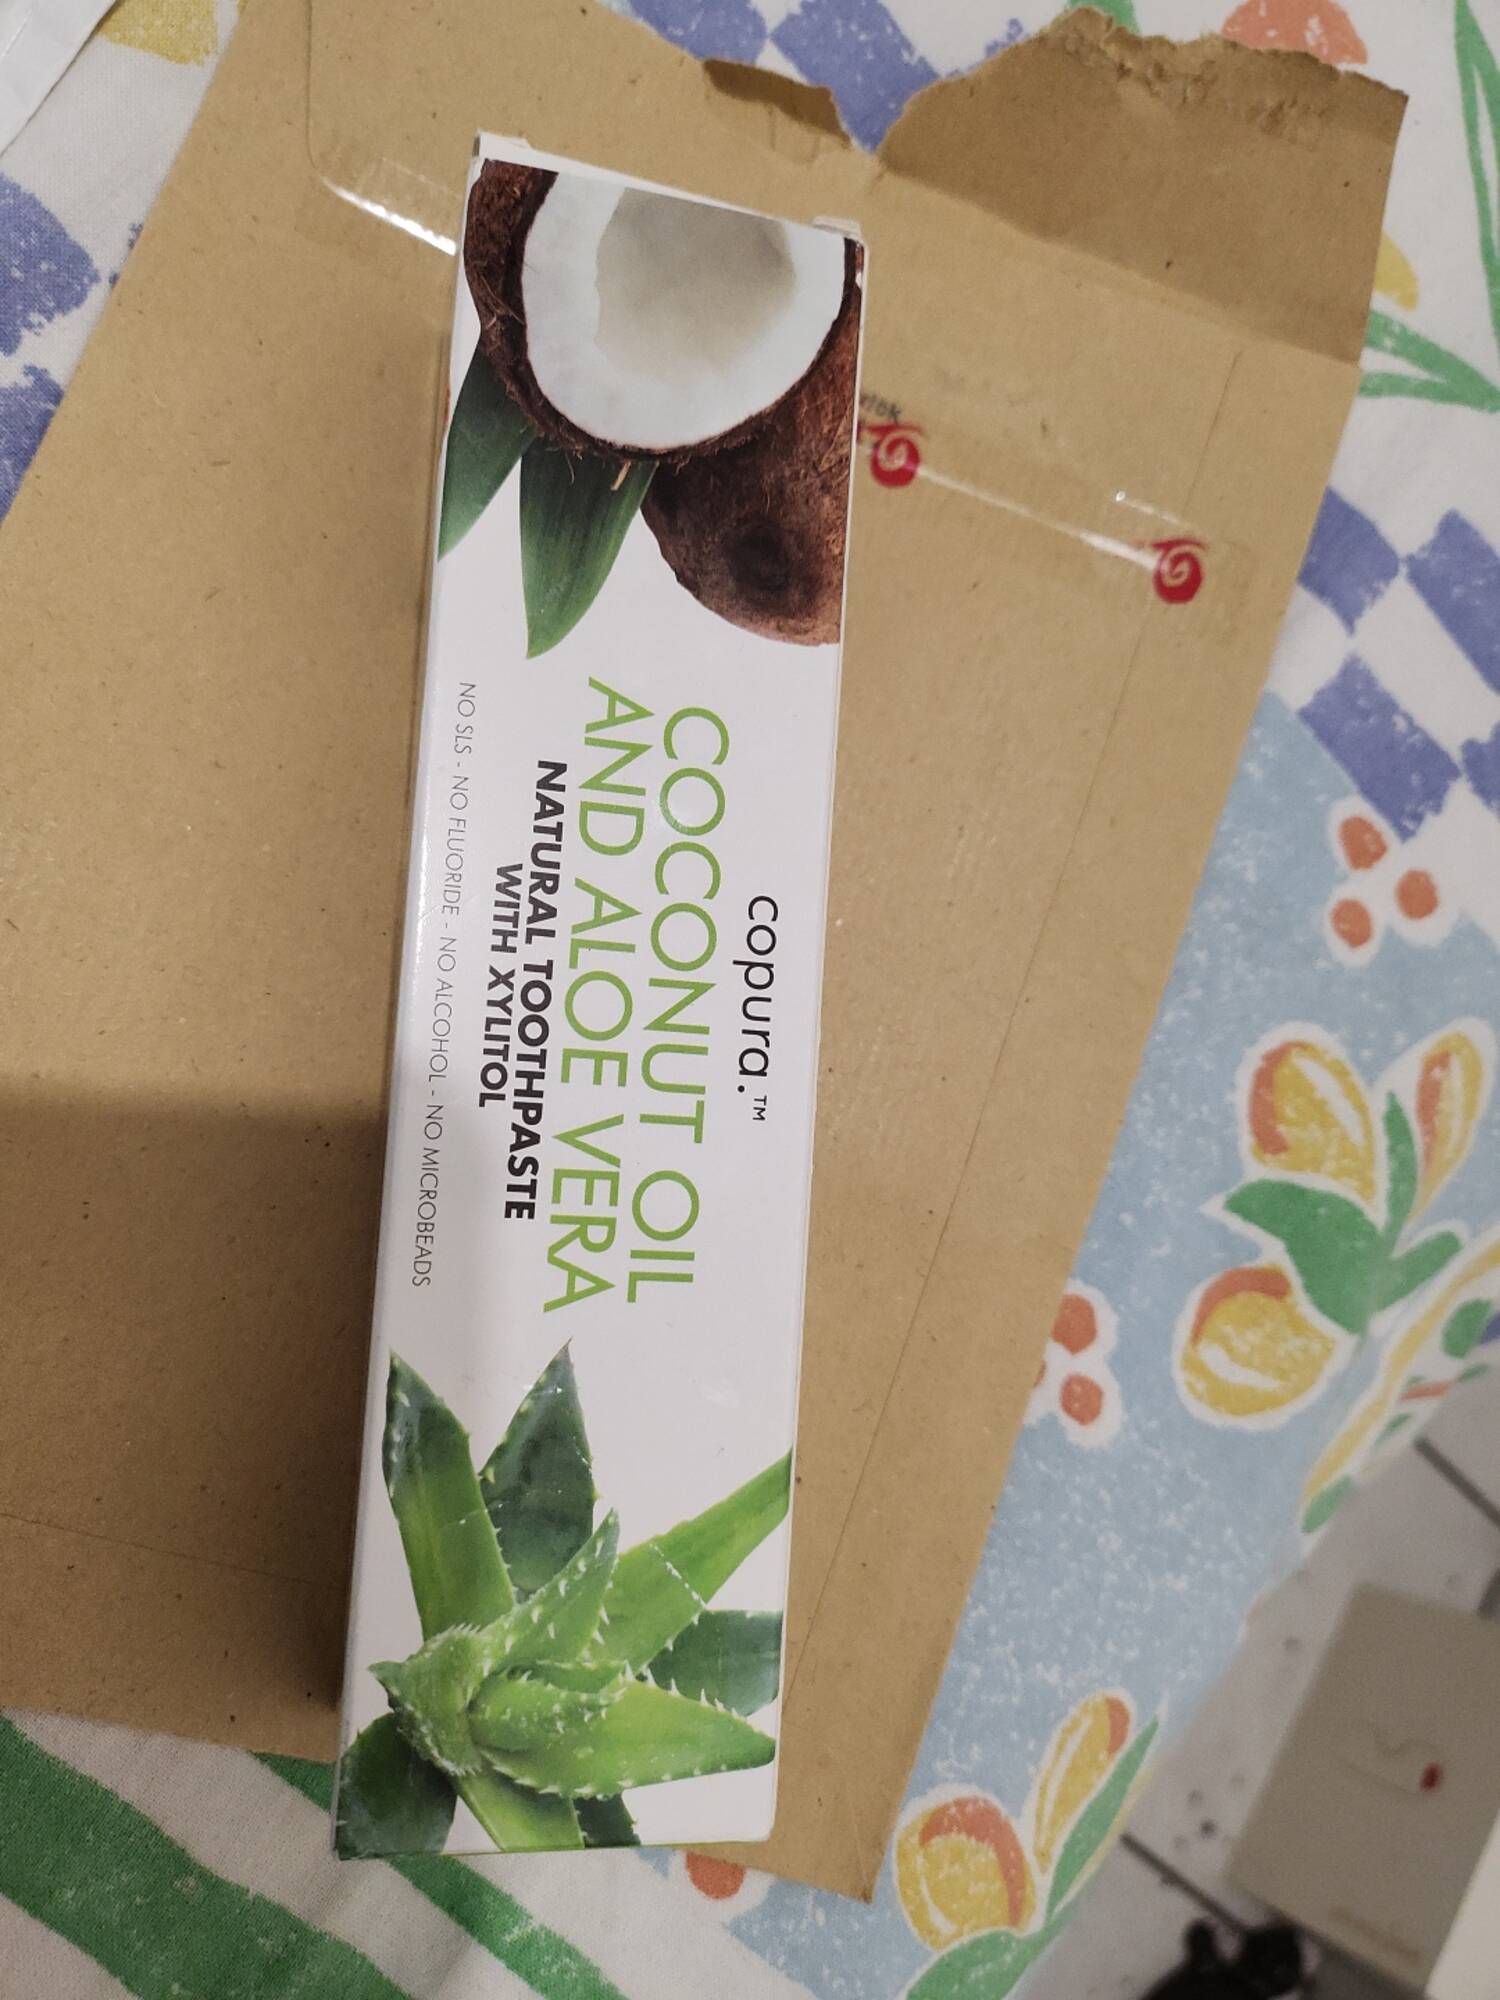 COPURA - Coconut oil and aloe vera - Natural toothpaste with xylitol